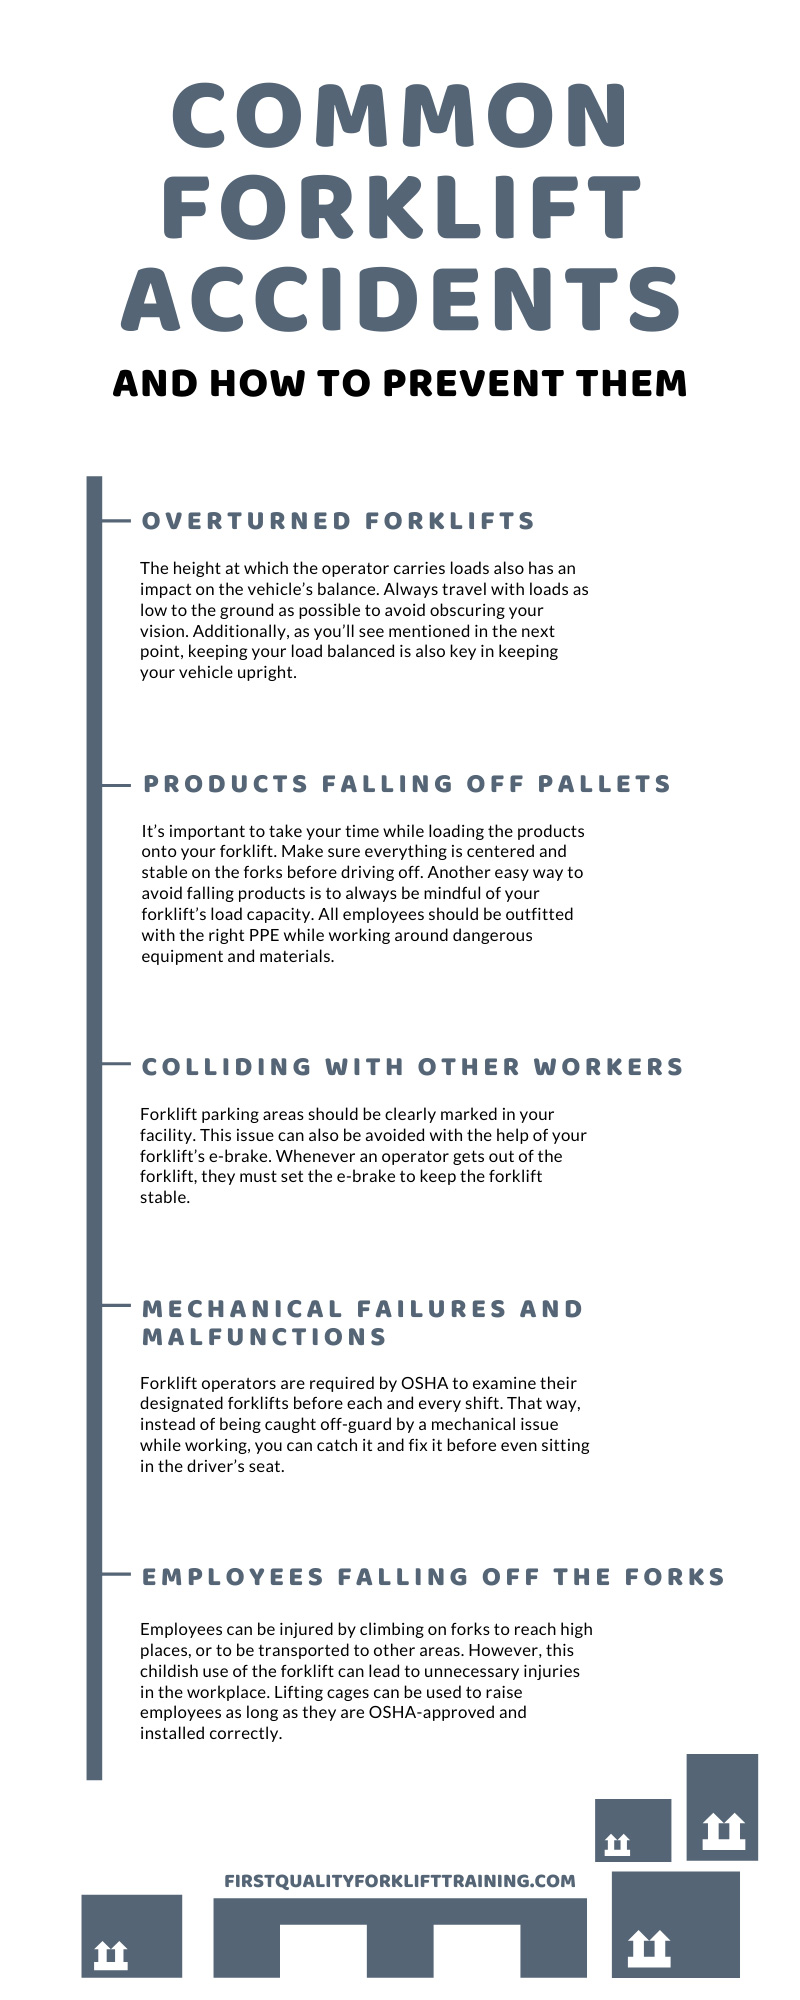 Common Forklift Accidents and How to Prevent Them infographic